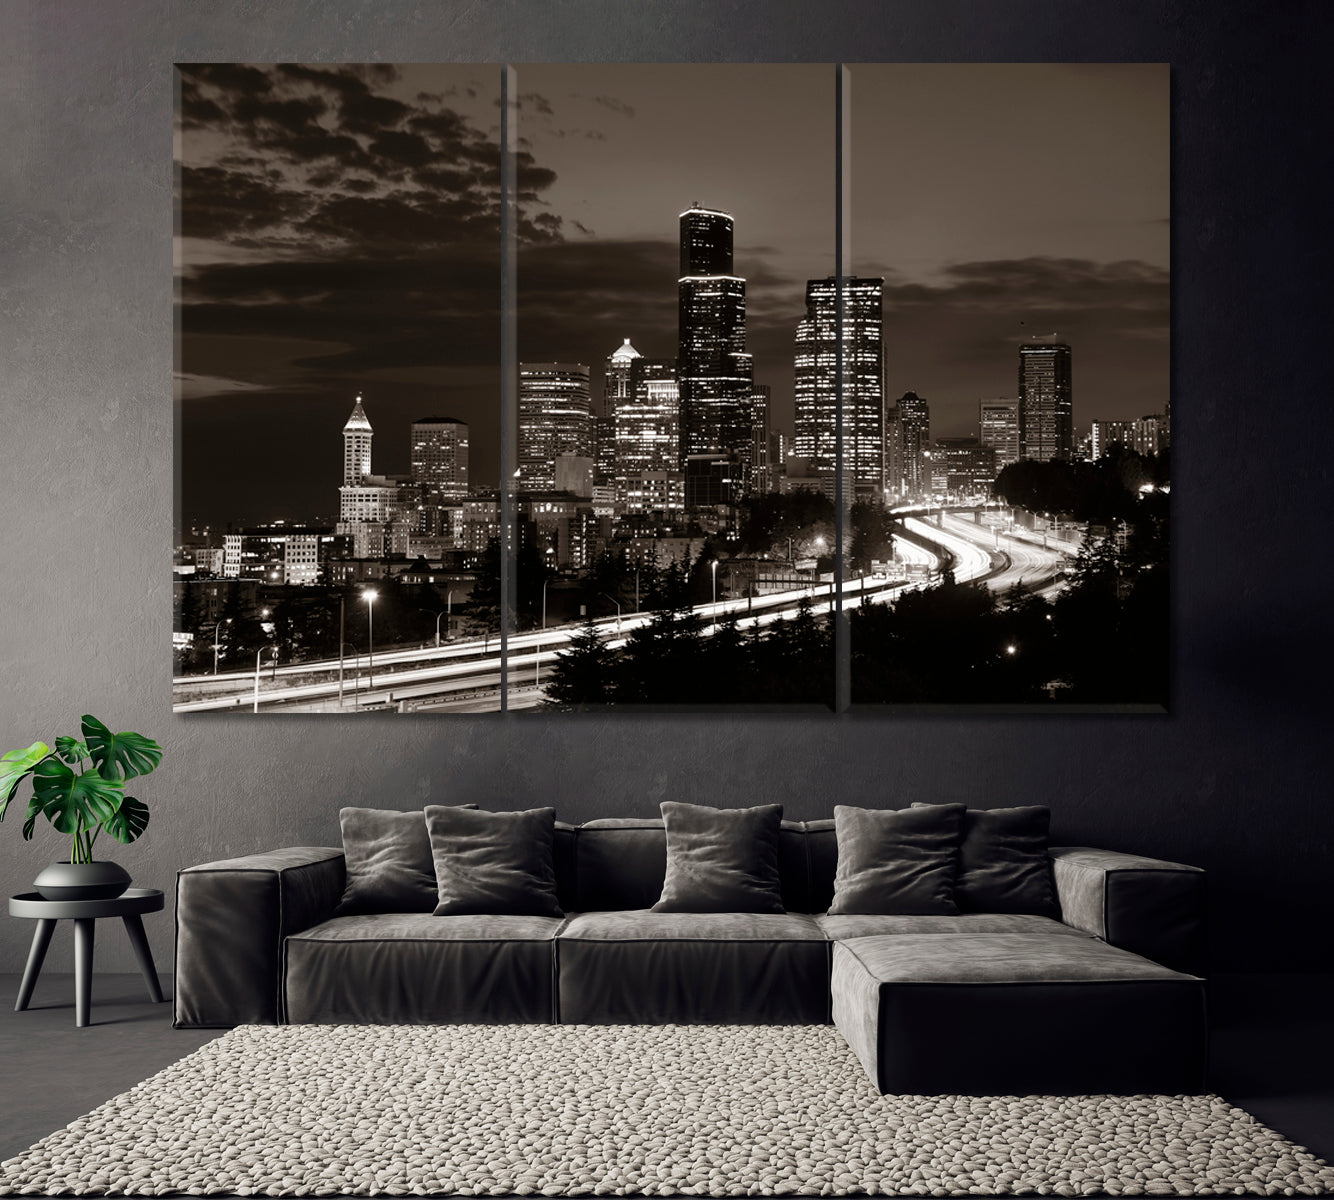 Seattle City at Dusk Canvas Print ArtLexy 3 Panels 36"x24" inches 